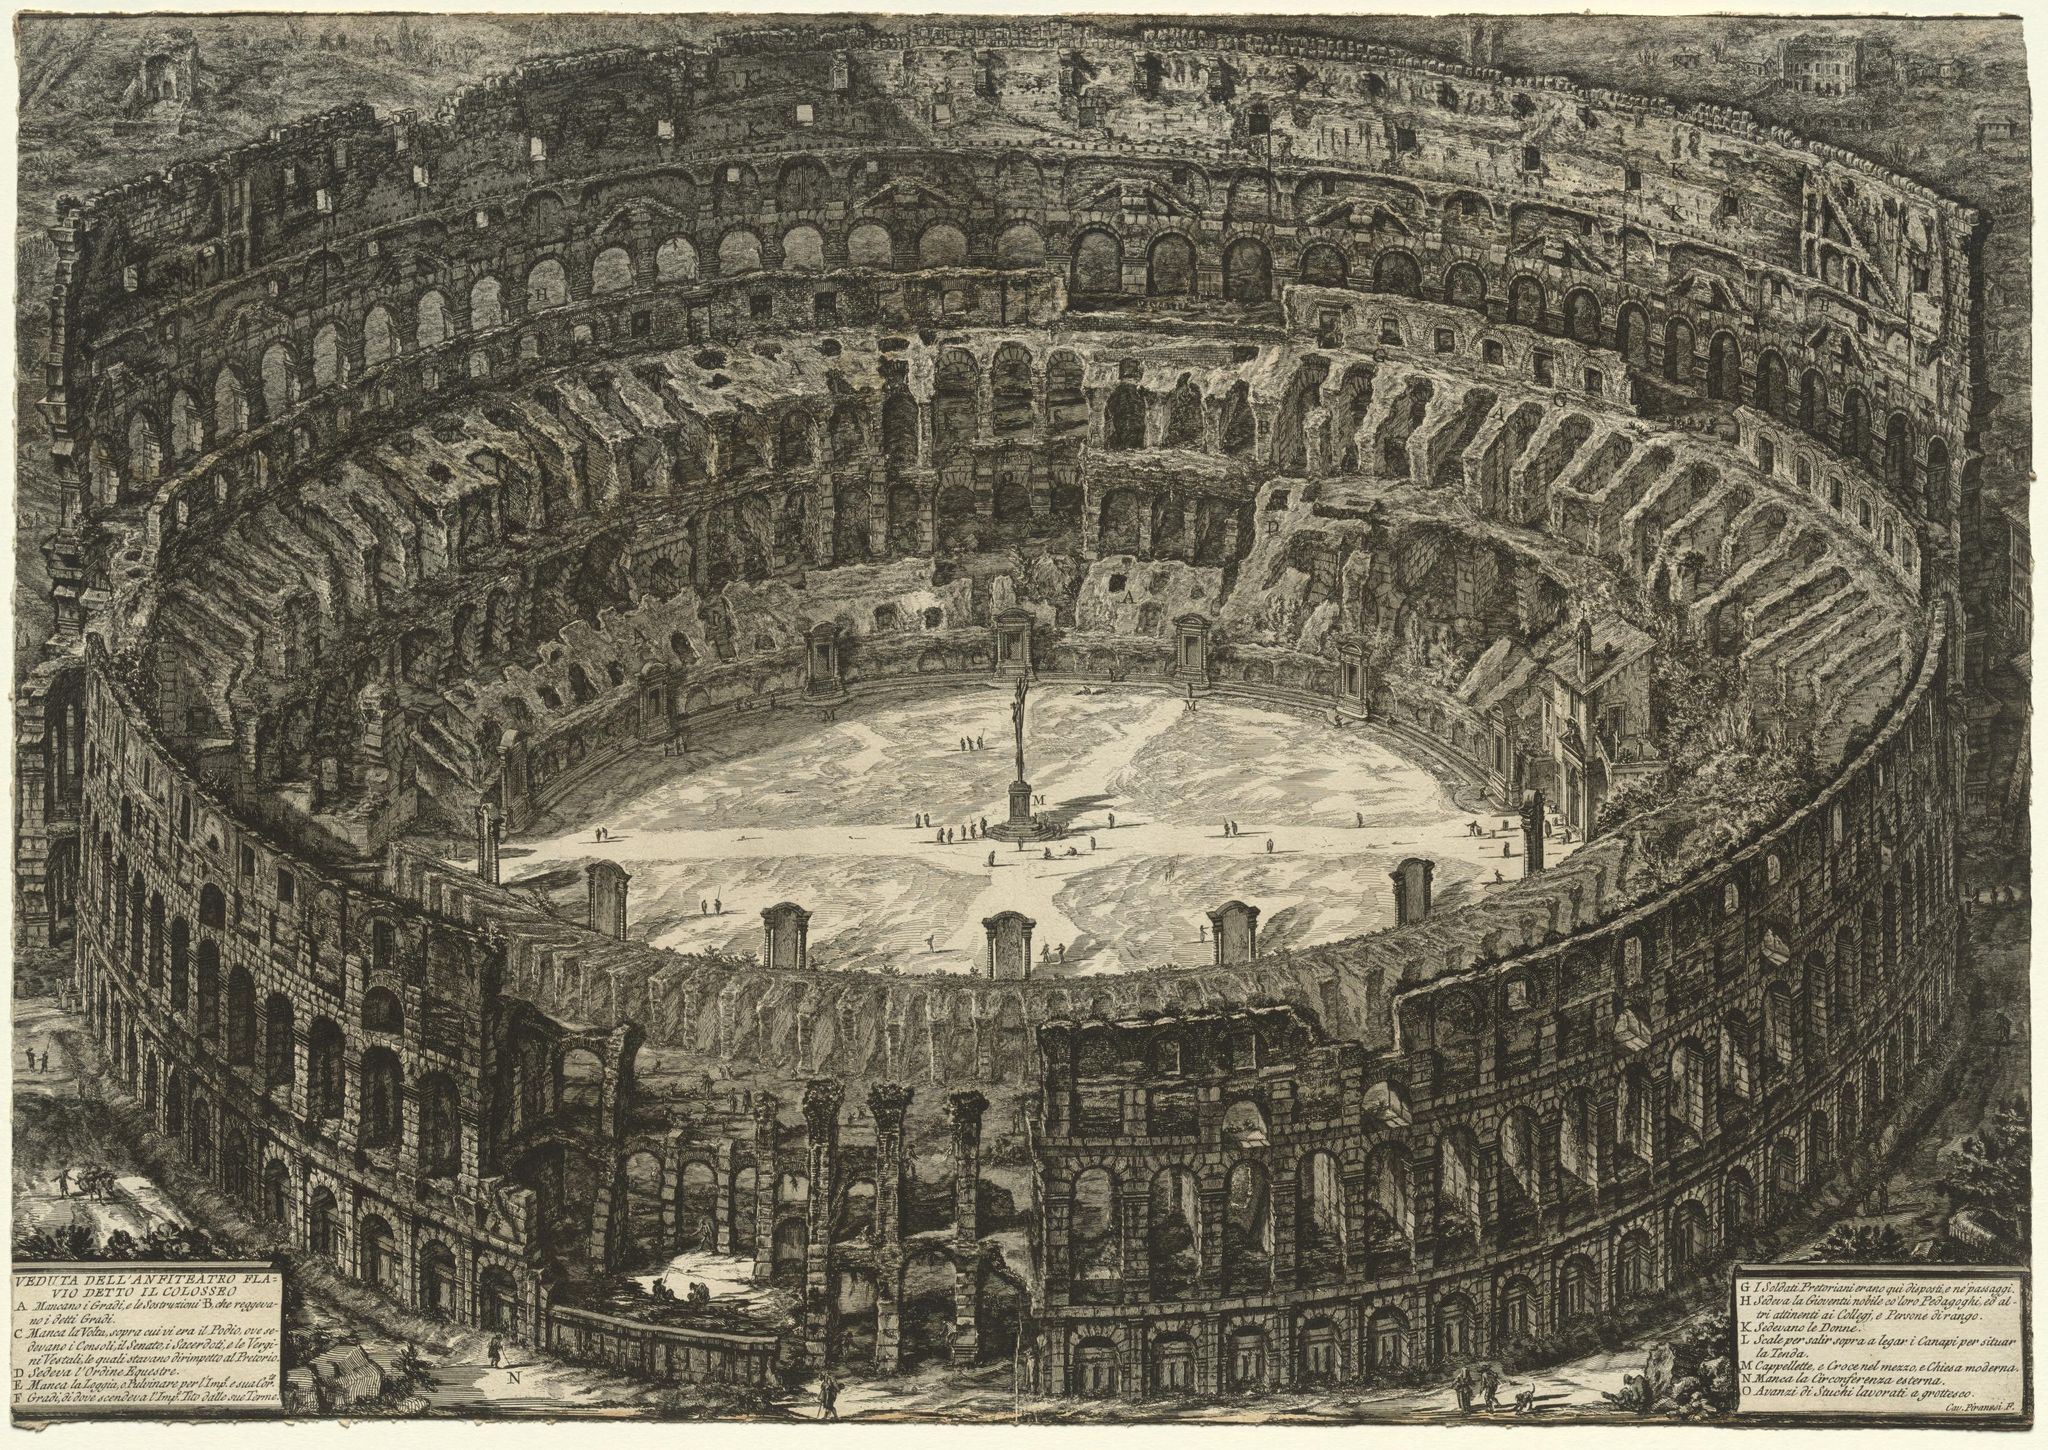 Views of Rome:  The Colosseum